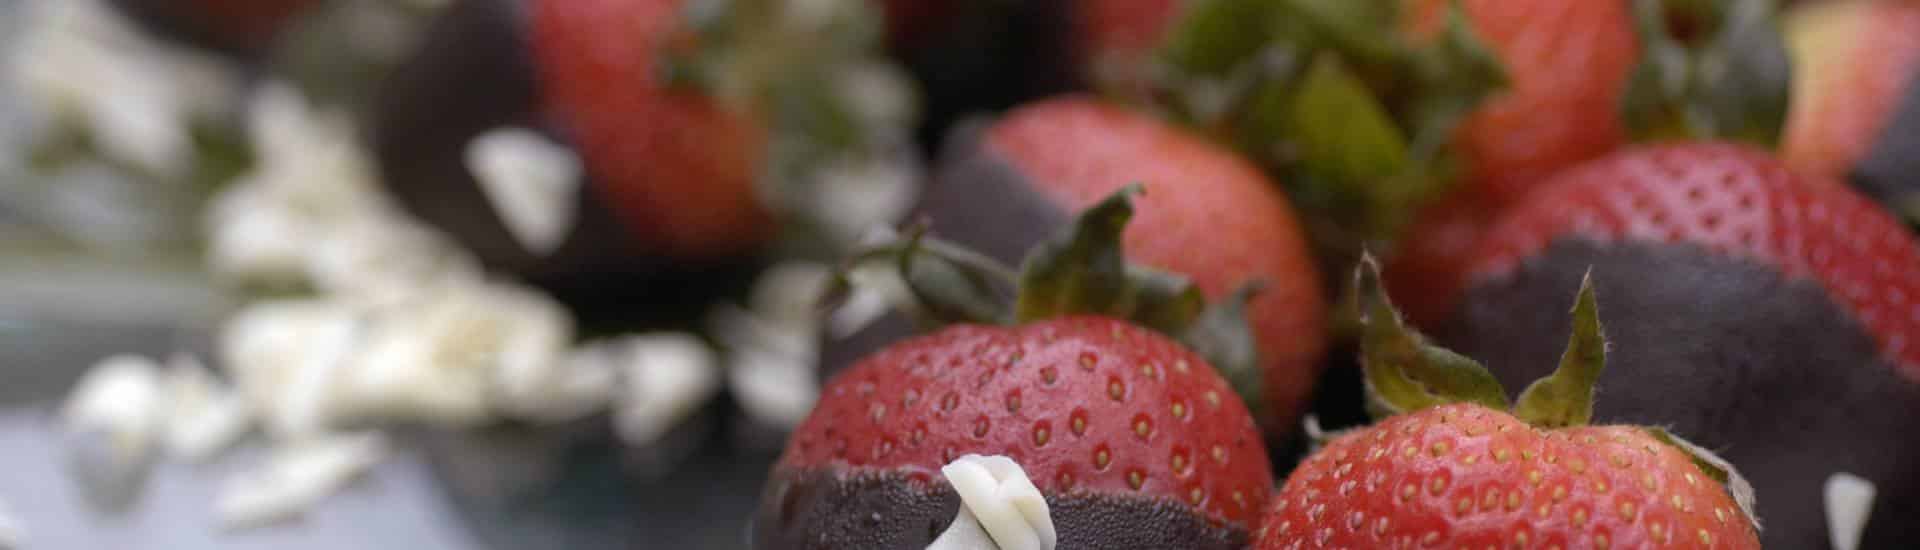 Close up view of chocolate dipped strawberries